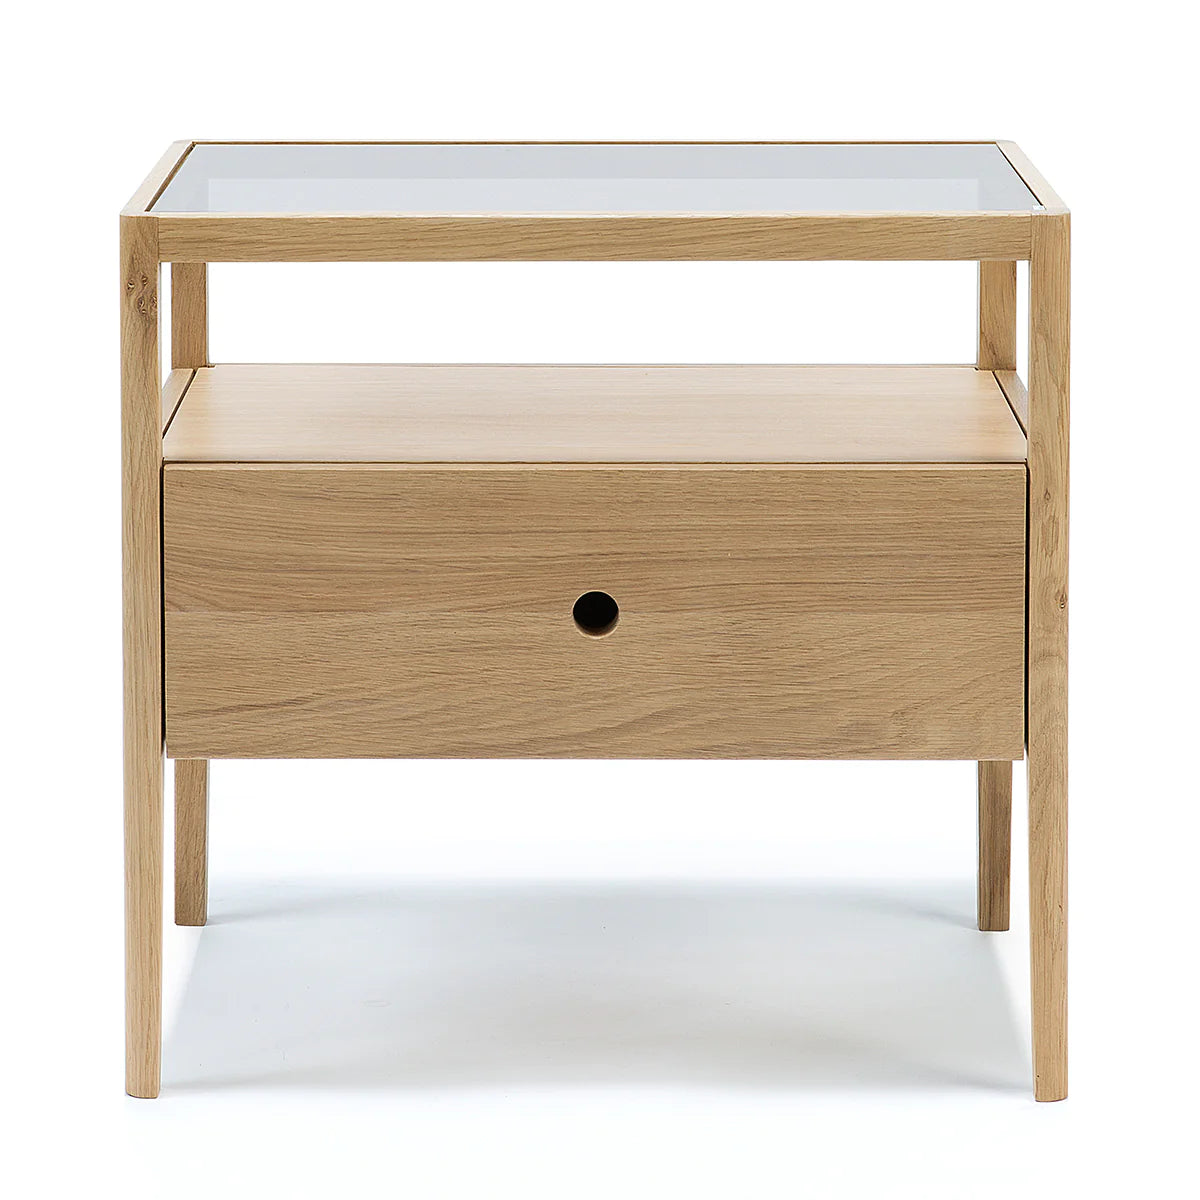 Ethnicraft Oak Spindle Bedside Table is available from Make Your House A Home, Bendigo, Victoria, Australia